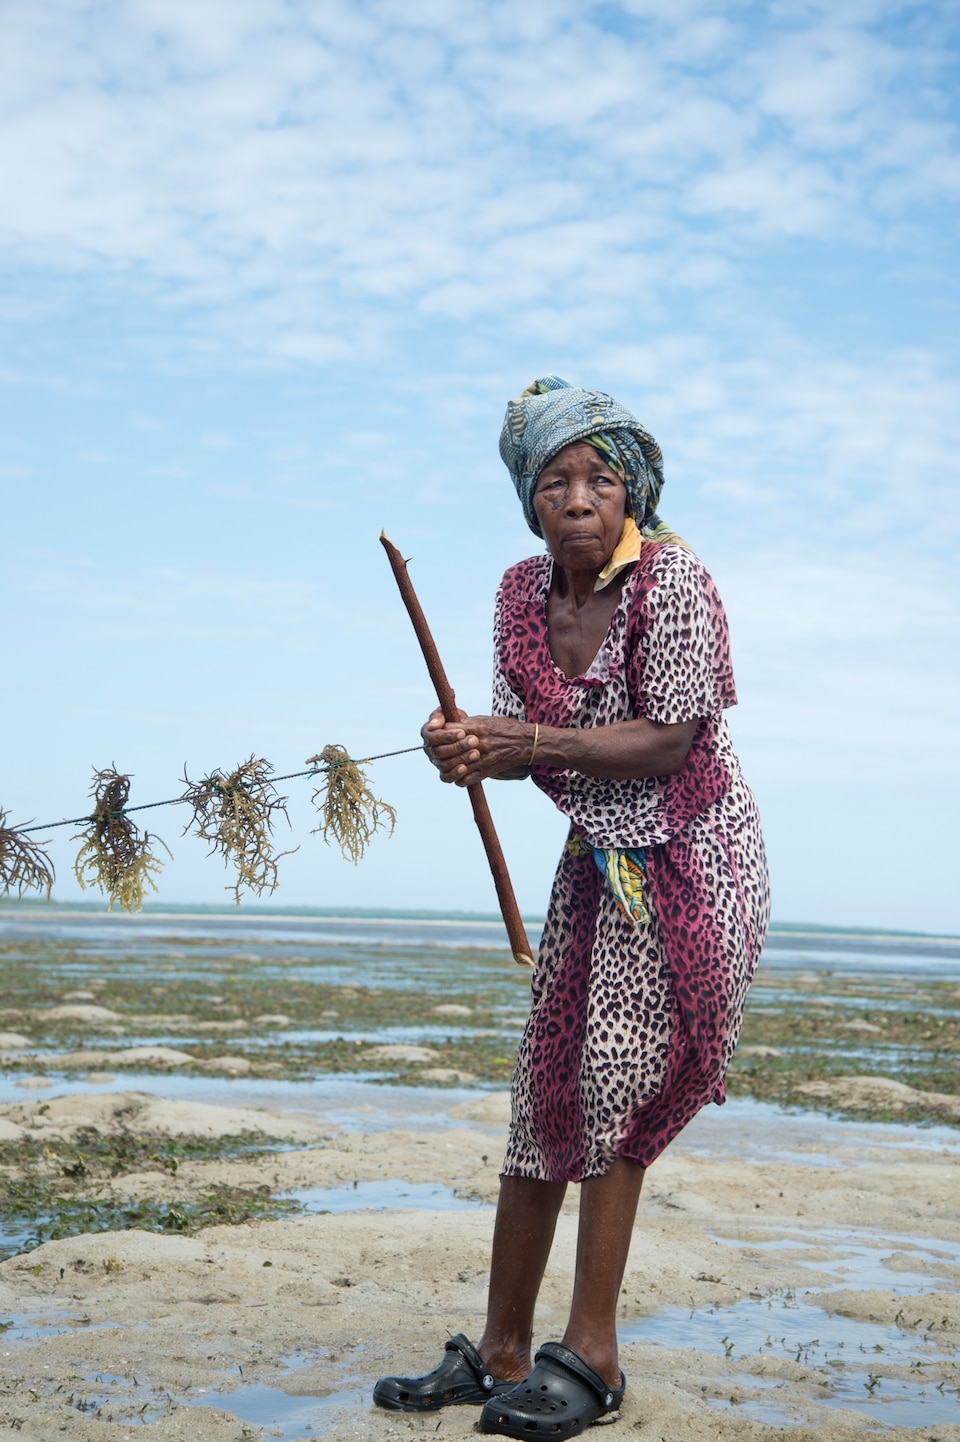 Pernise, a seaweed farmer, with a string of seaweed that she will leave to grow.